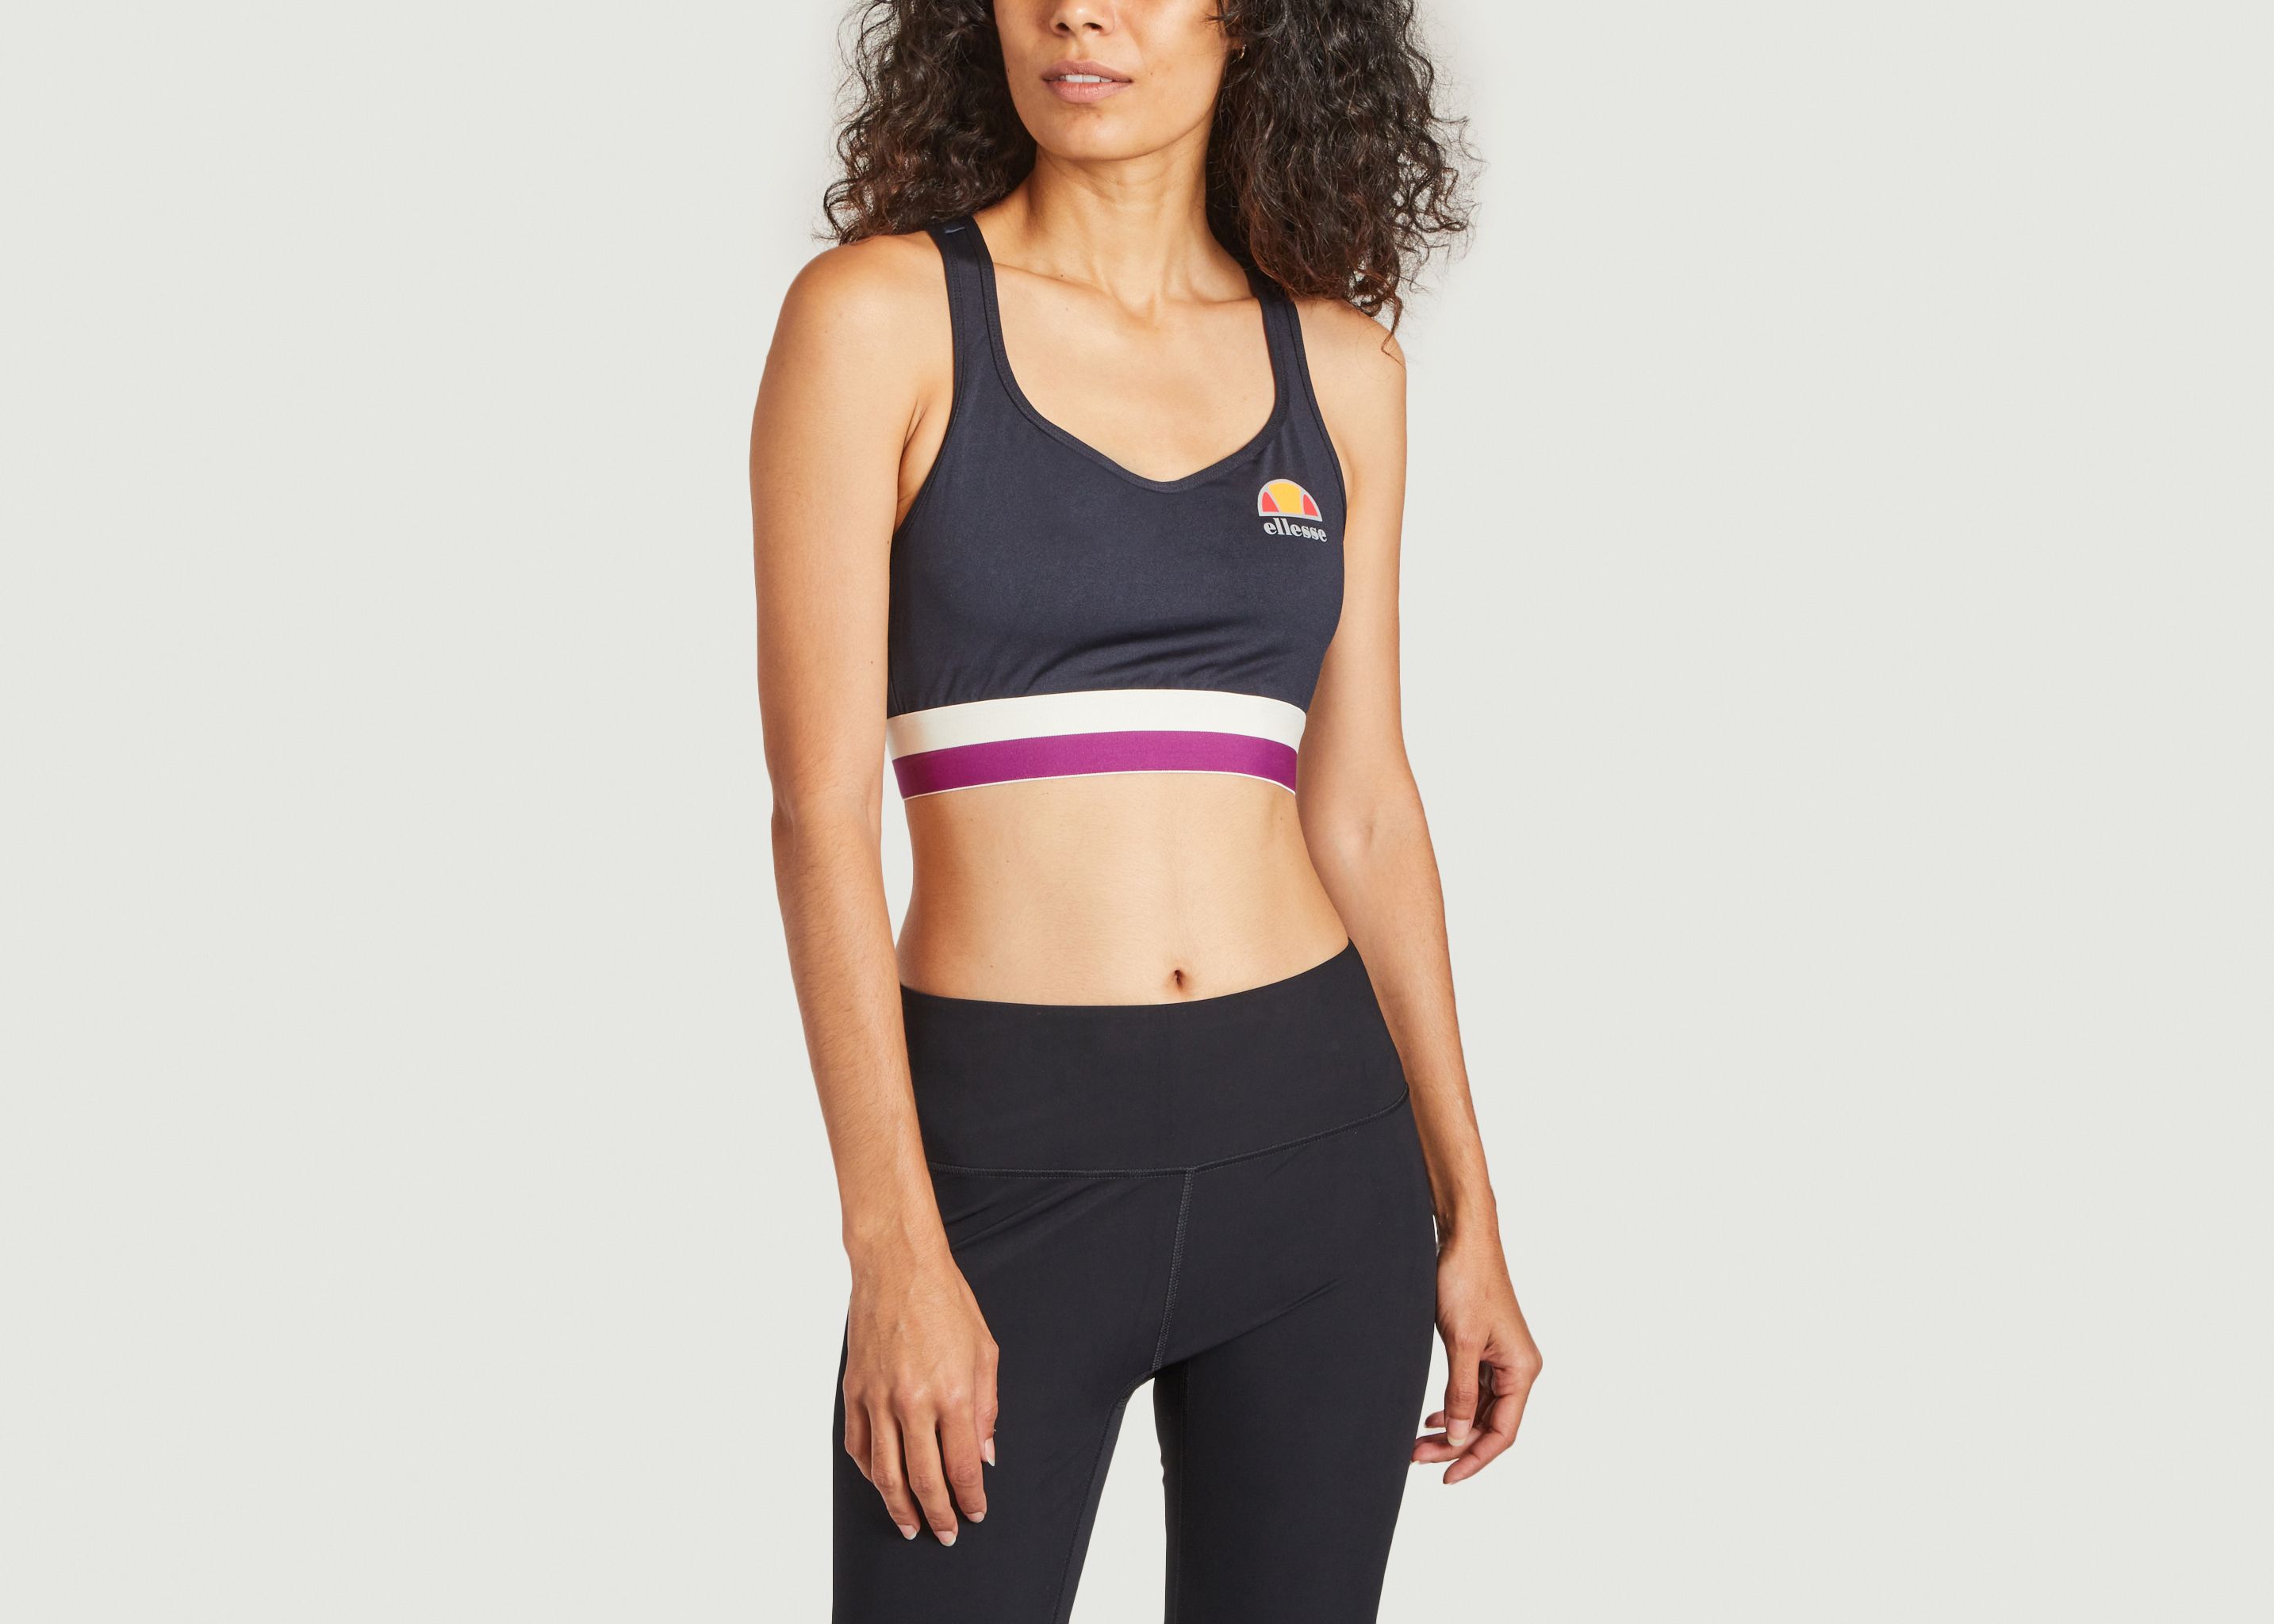 Fondi sports bra with contrasting bands - Ellesse